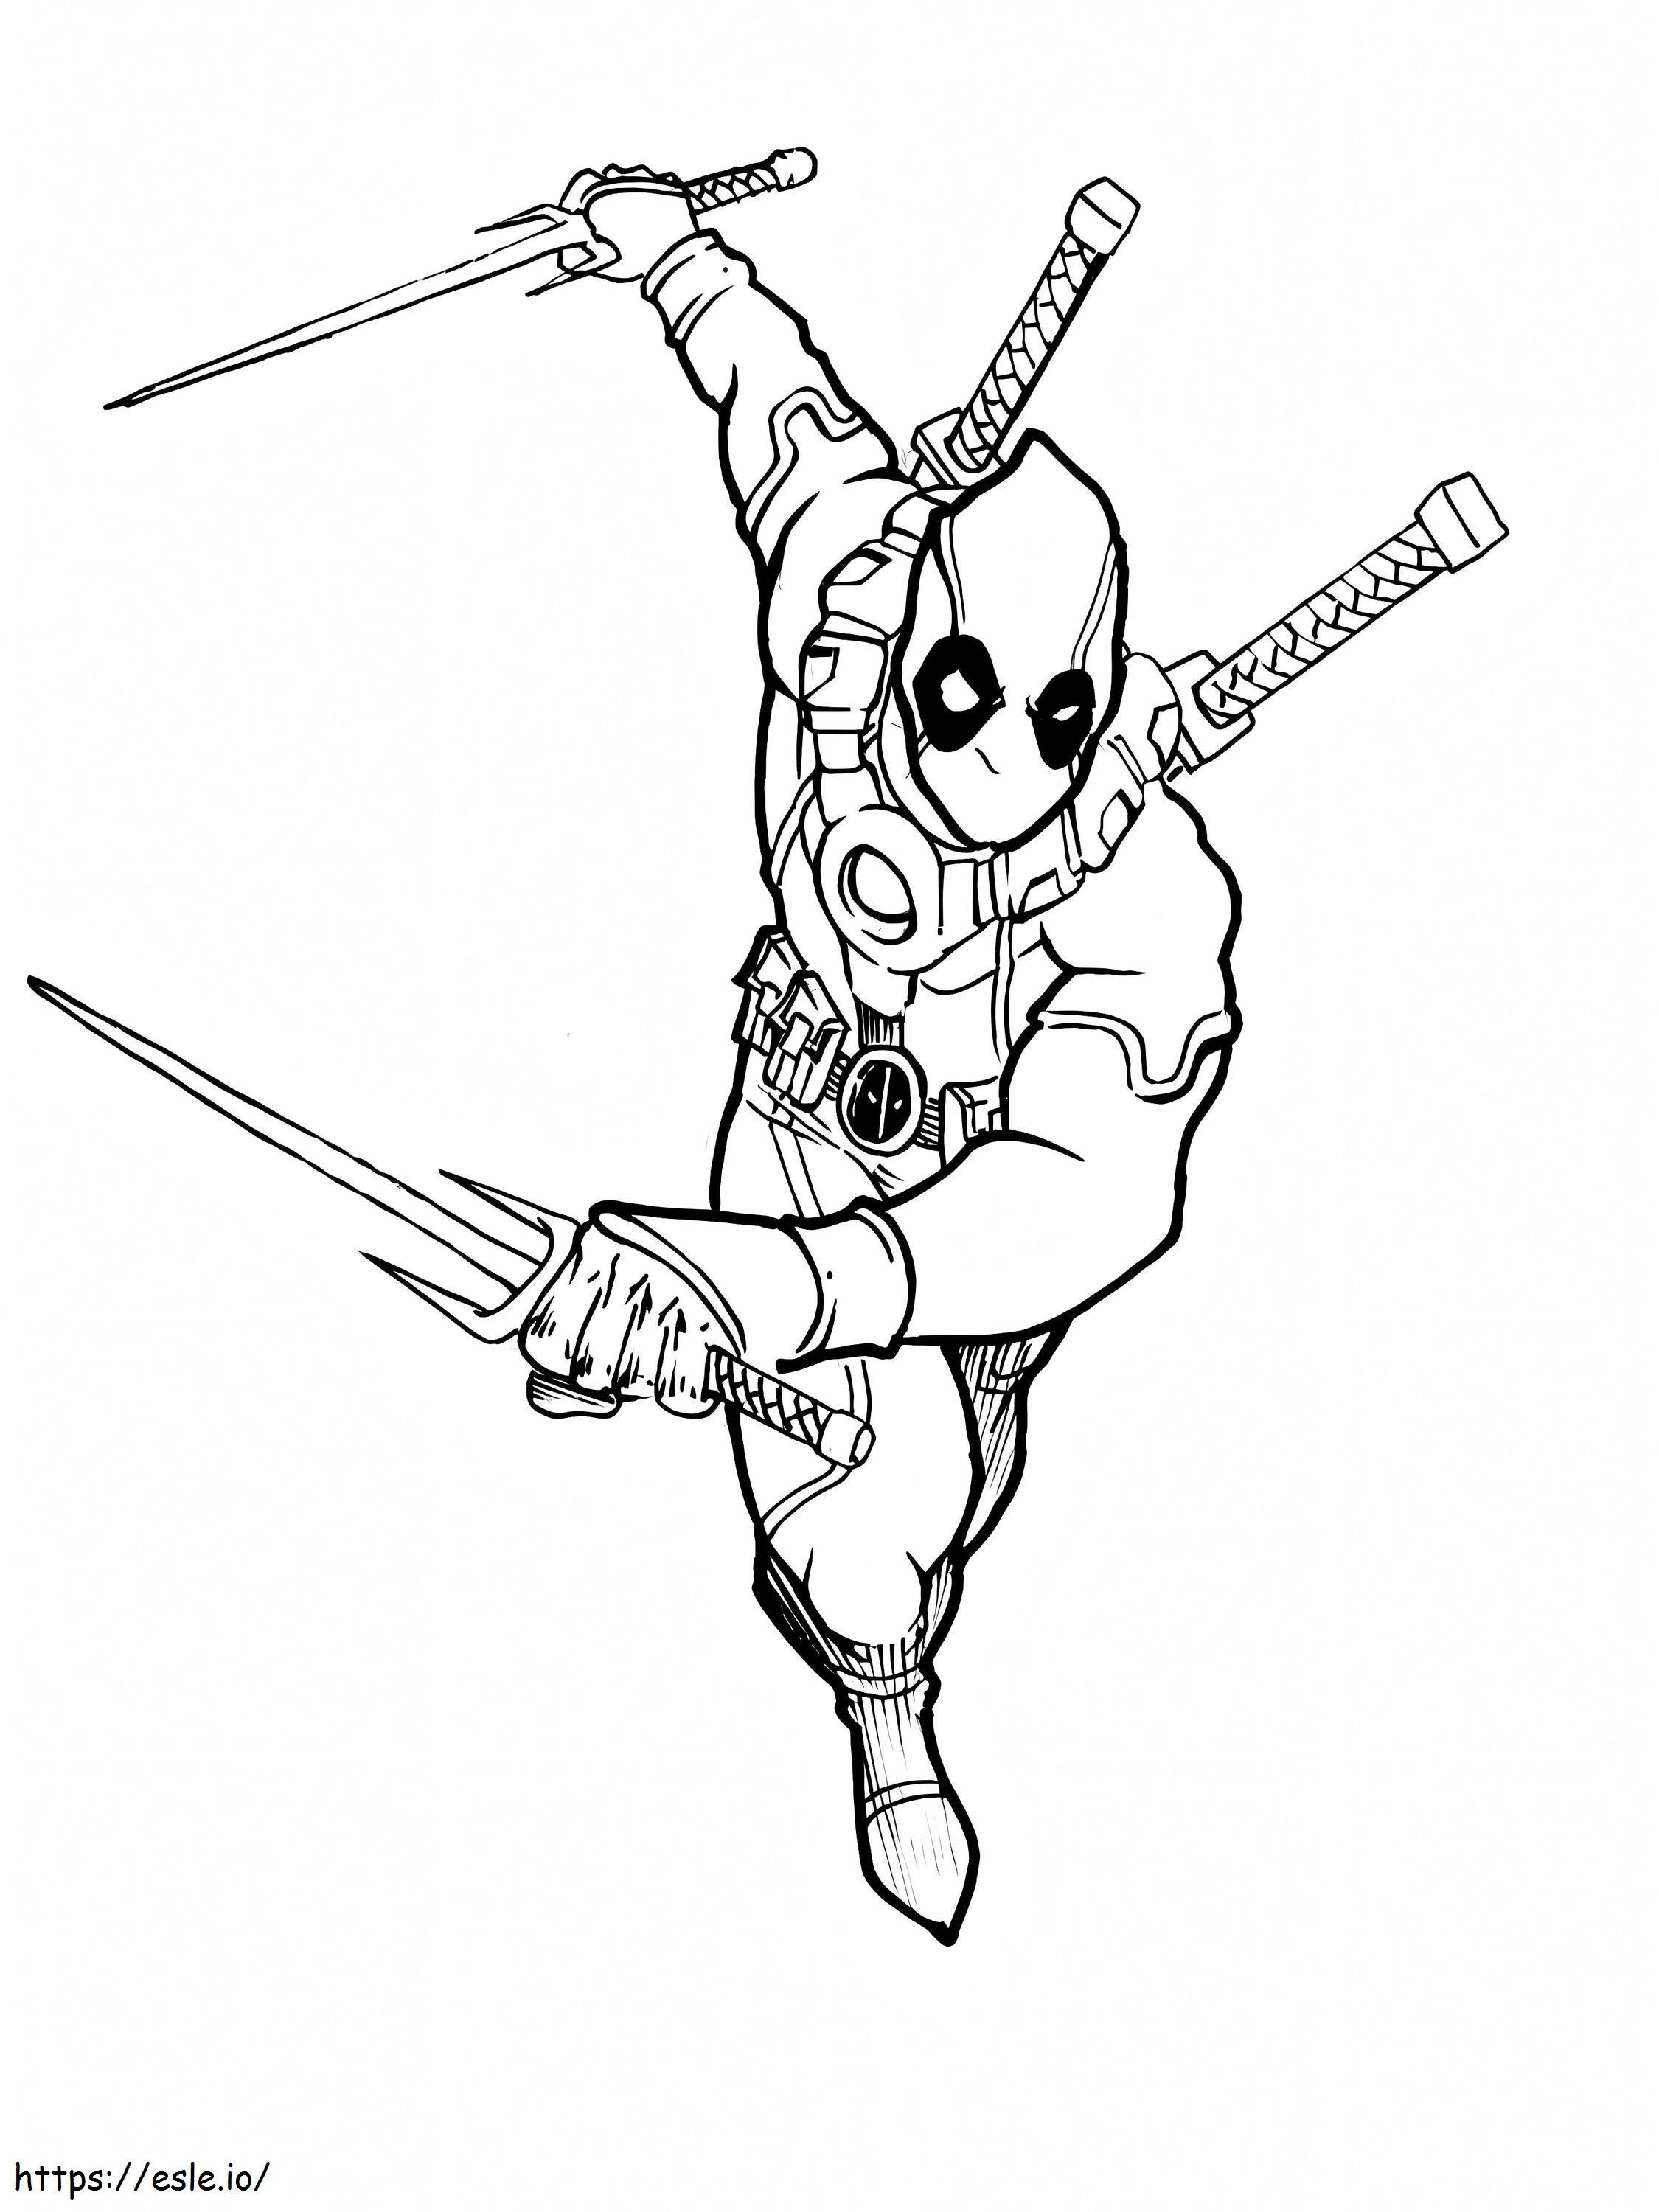 Deadpool Attack coloring page